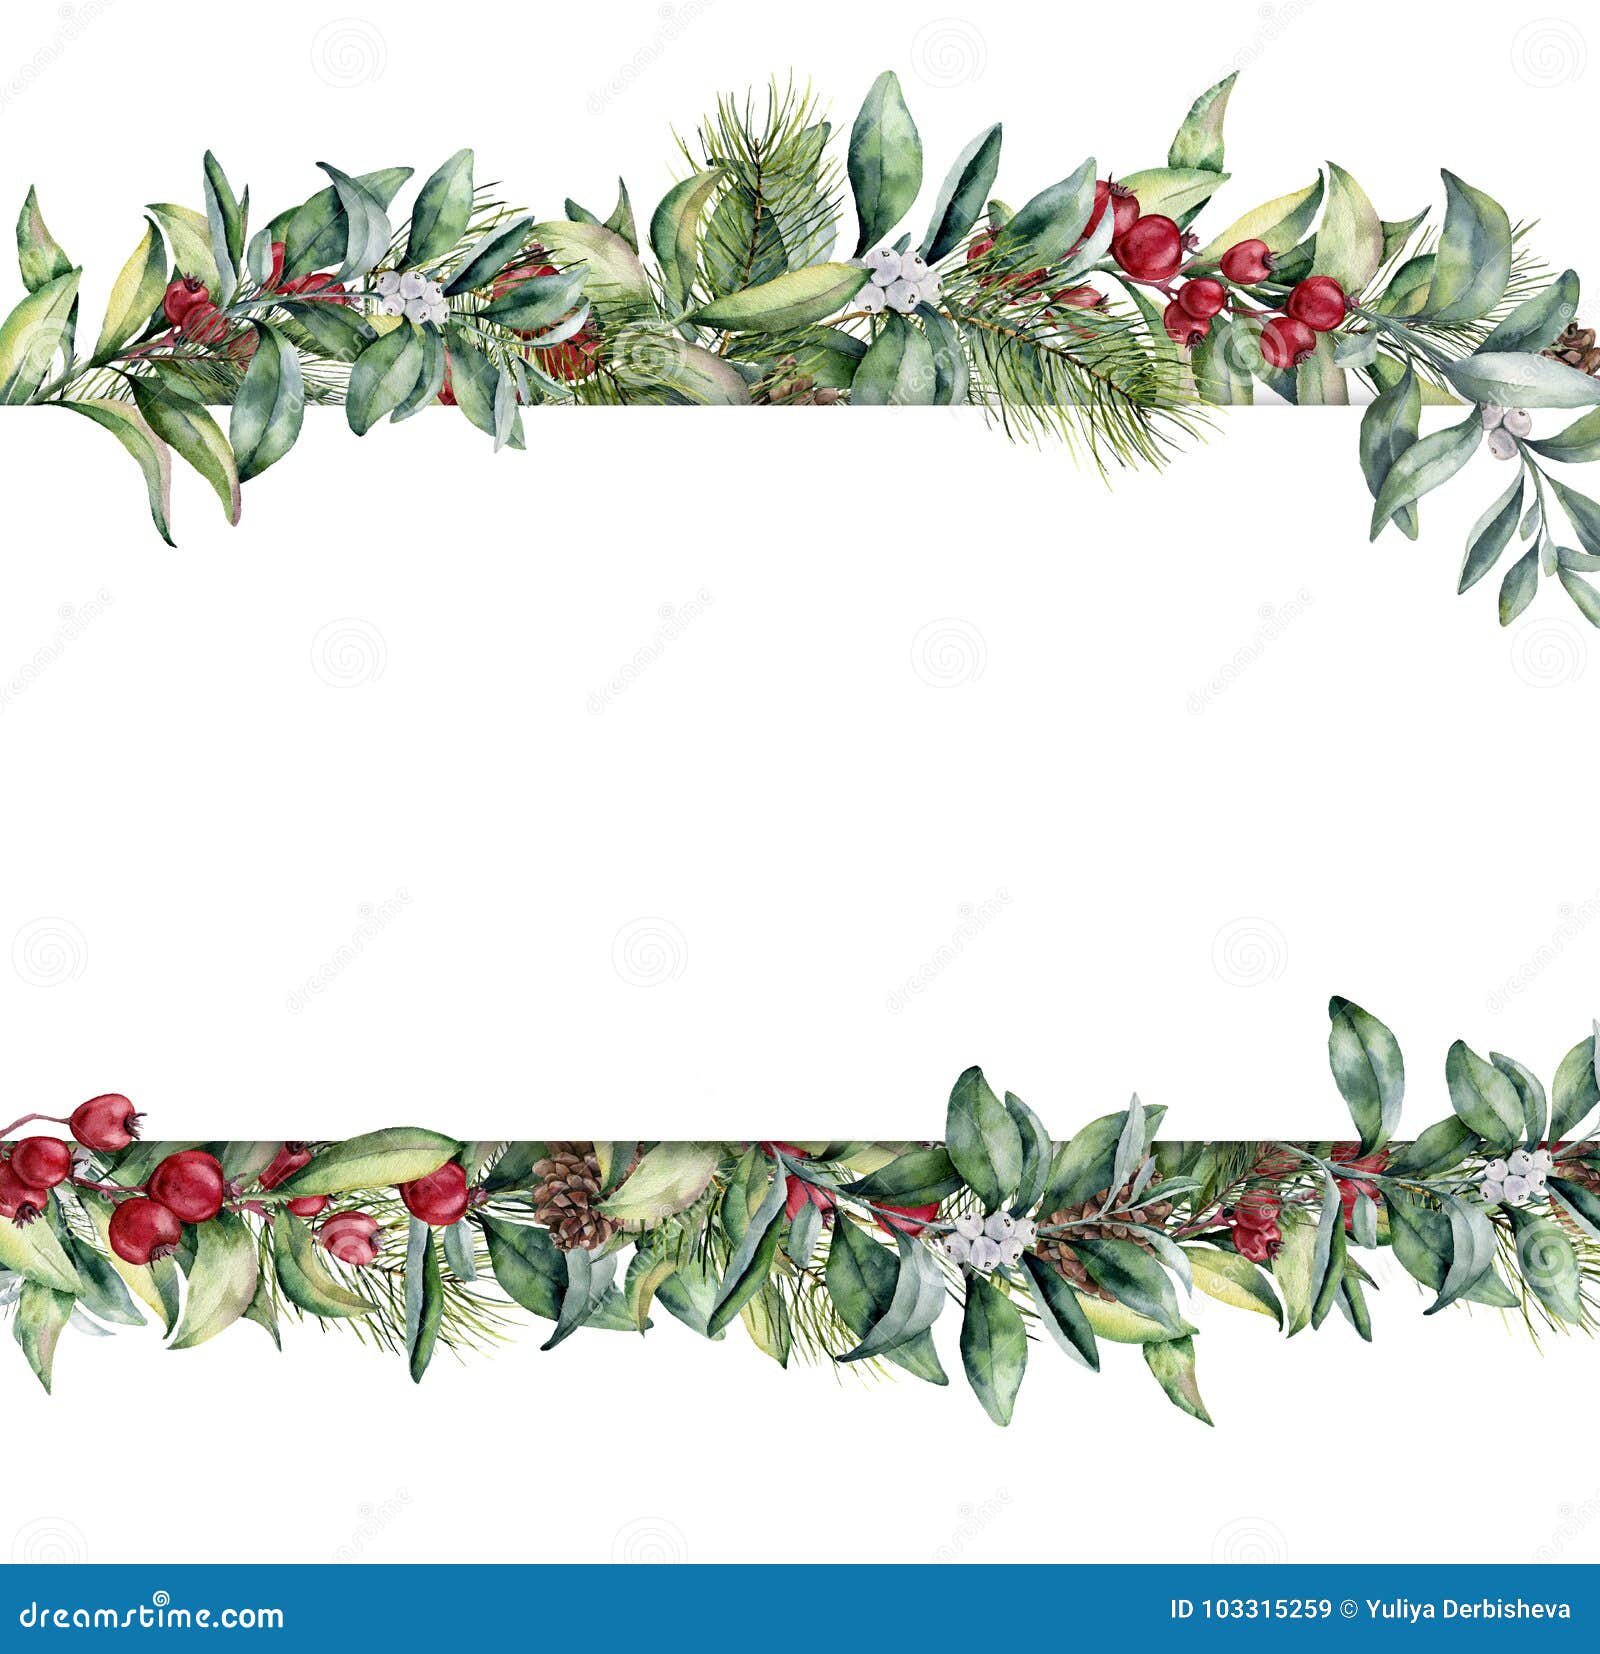 watercolor christmas floral banner. hand painted floral garland with berries and fir branch, pine cone, bells and ribbon